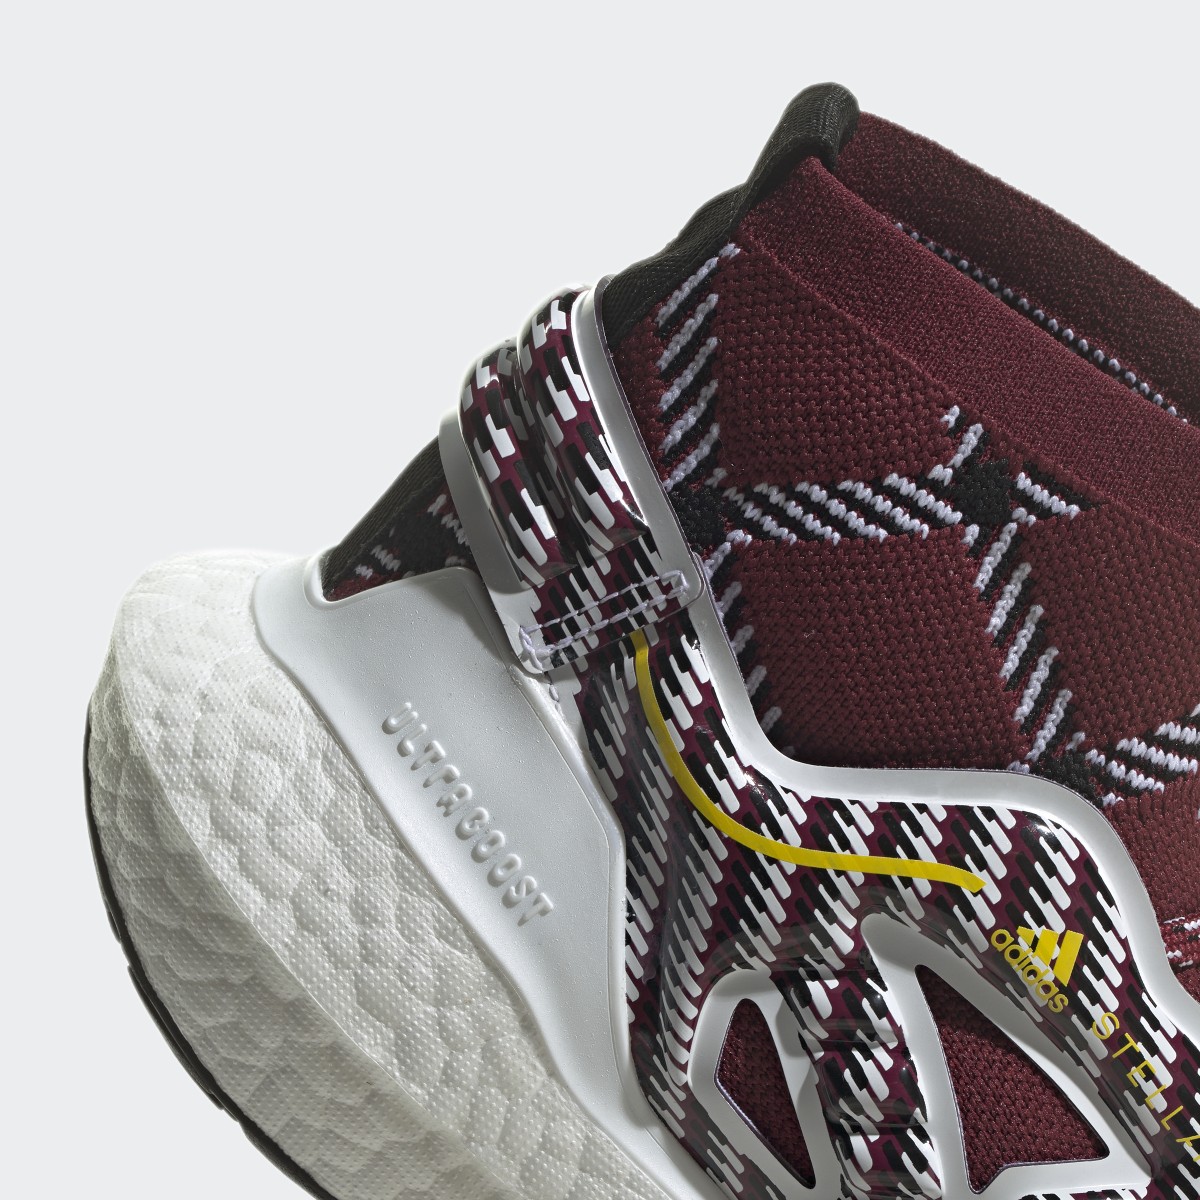 Adidas by Stella McCartney Ultraboost 22 Elevated Shoes. 10